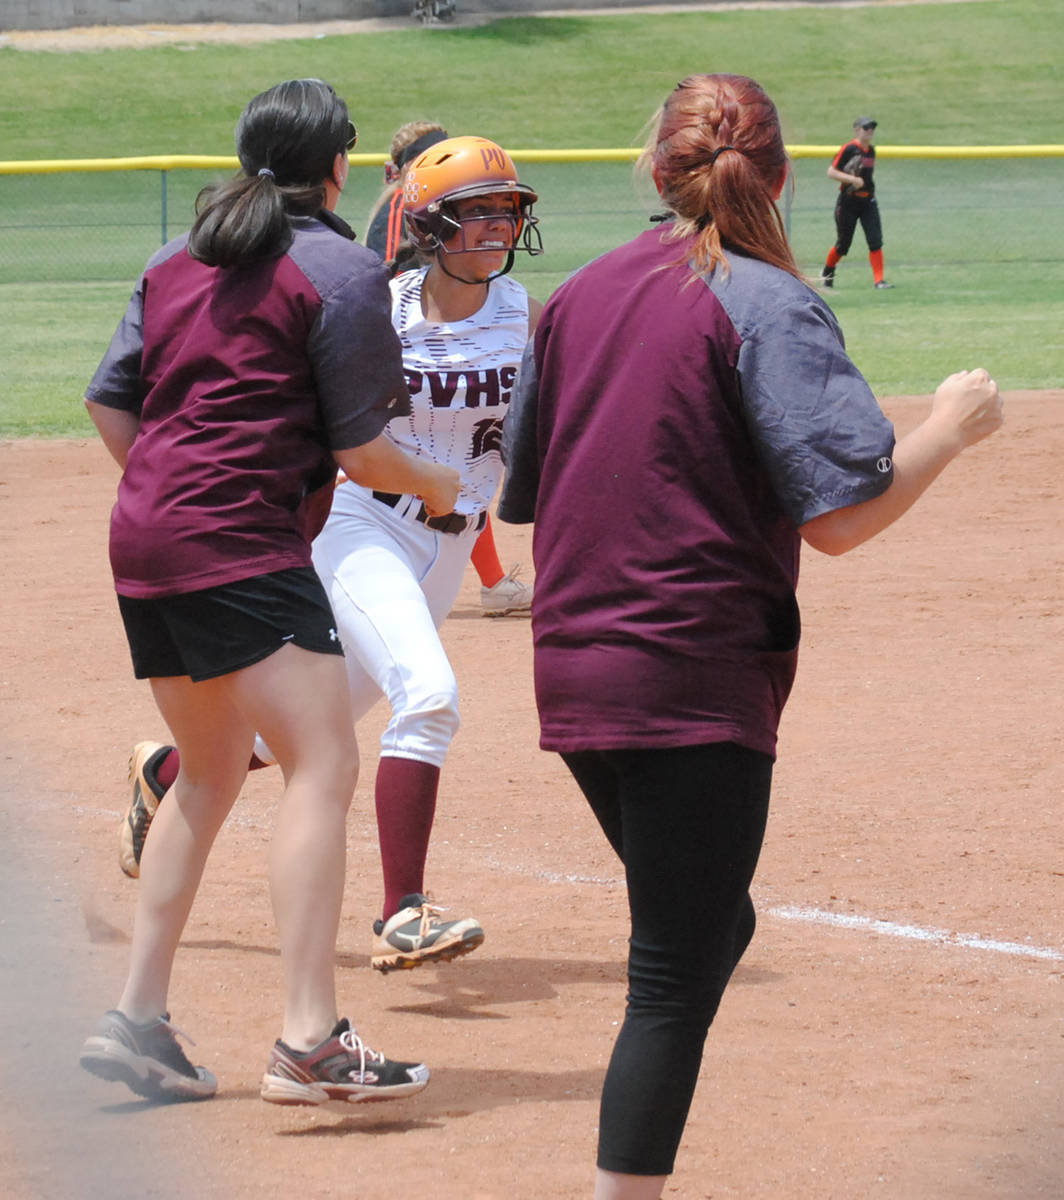 Cassondra Lauver/Special to the Pahrump Valley Times Kaden Cable rounds third base after hittin ...